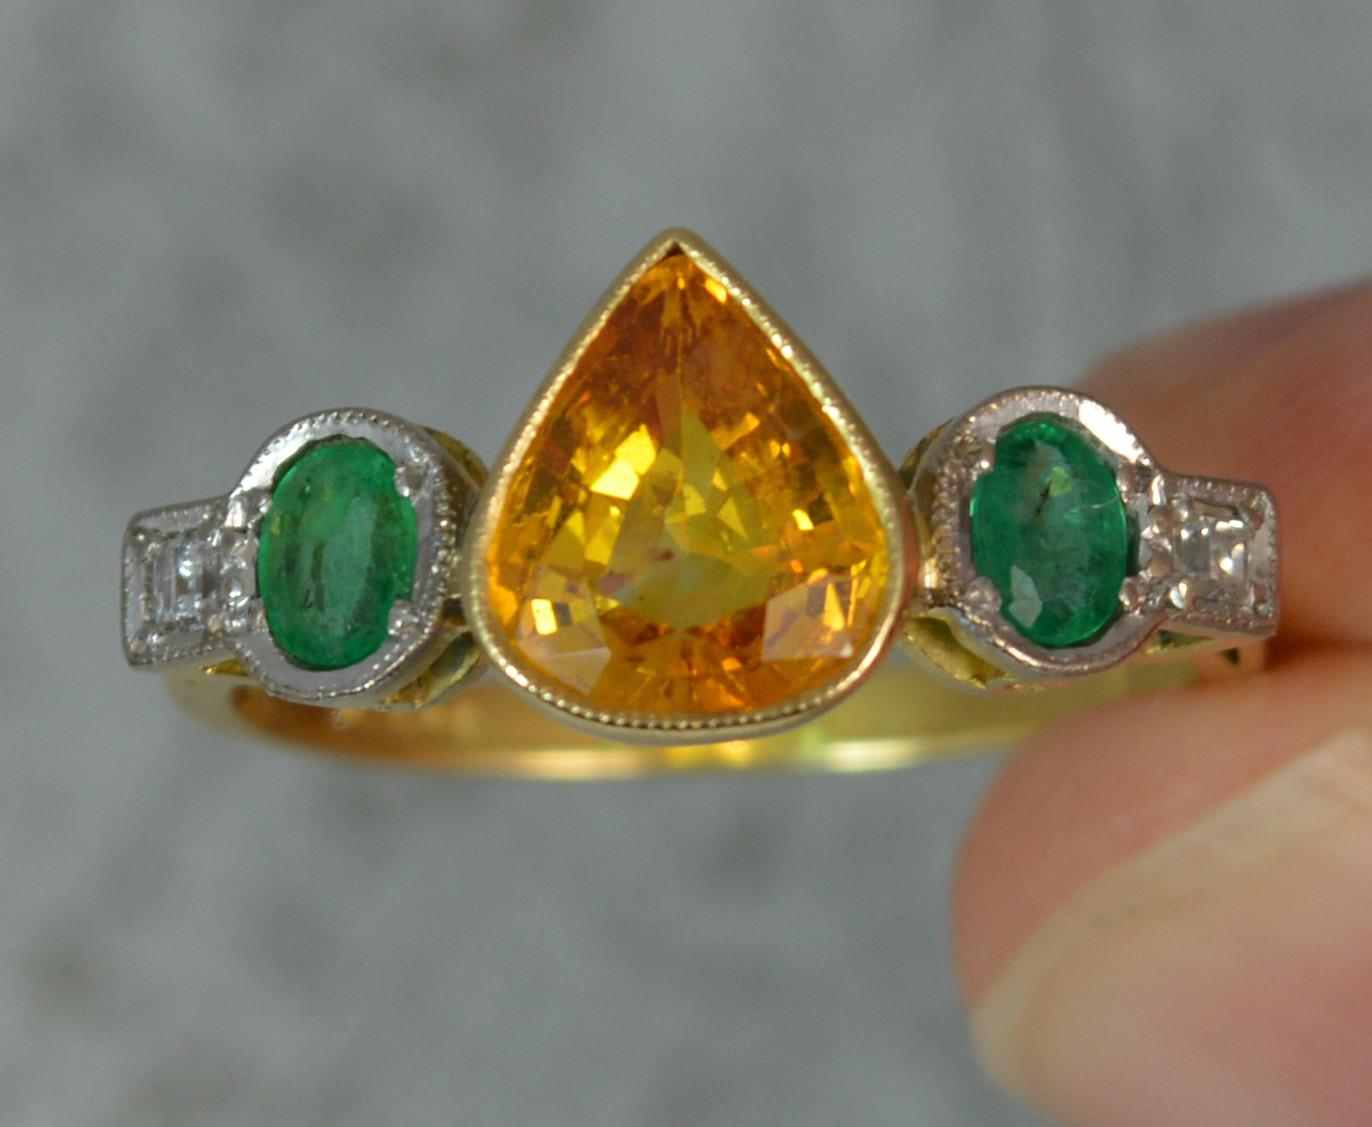 A stunning and very rare orange sapphire, emerald and diamond ring.
SIZE ; N 1/2 UK, 7 US
Modelled in 18 carat yellow gold with platinum head setting.
Designed with a pear cut Ceylon origin sapphire to the centre in bezel setting, 7.4mm x 8.8mm. To